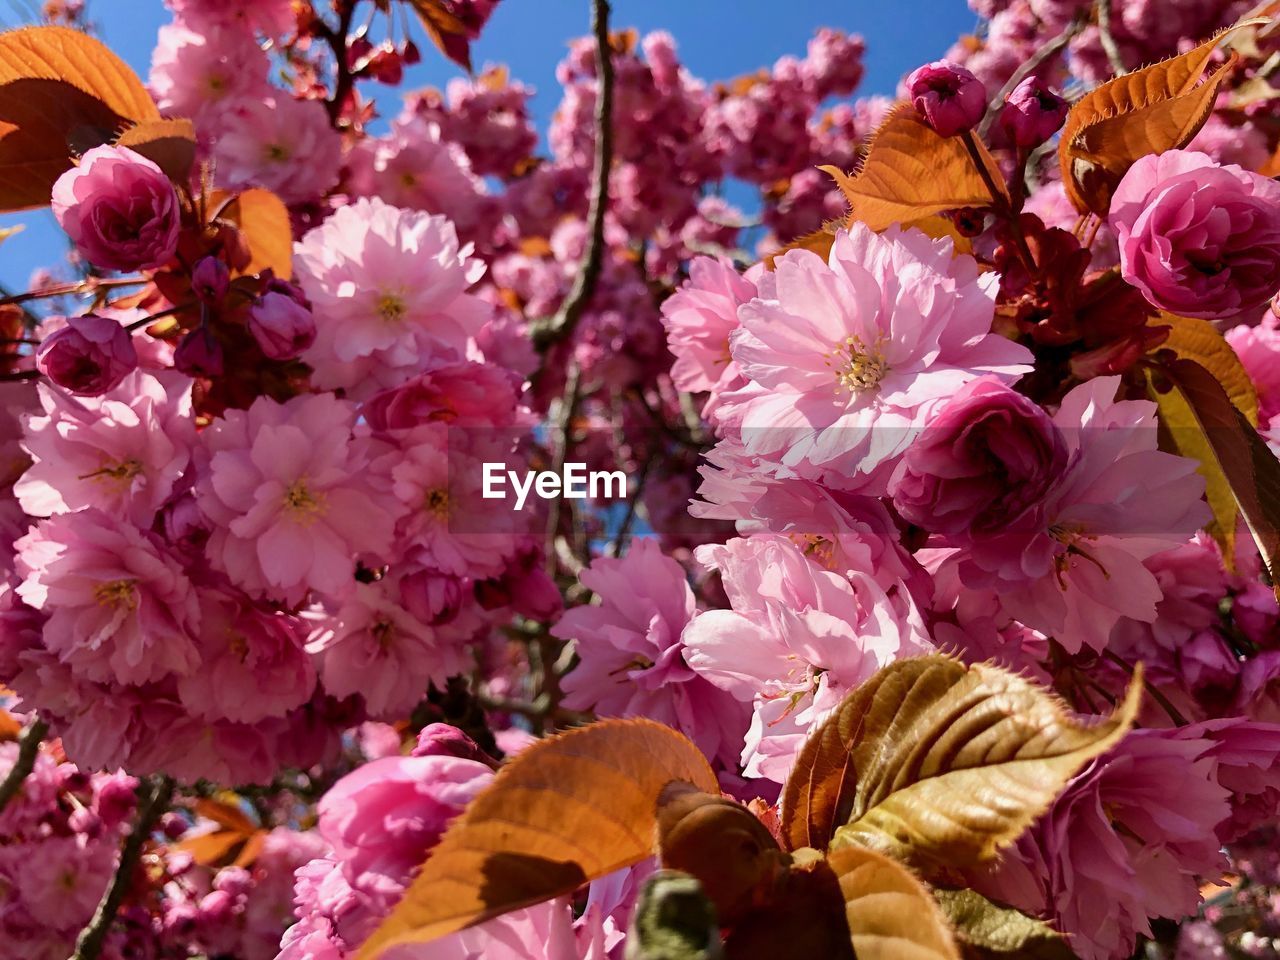 CLOSE-UP OF PINK CHERRY BLOSSOM FLOWERS